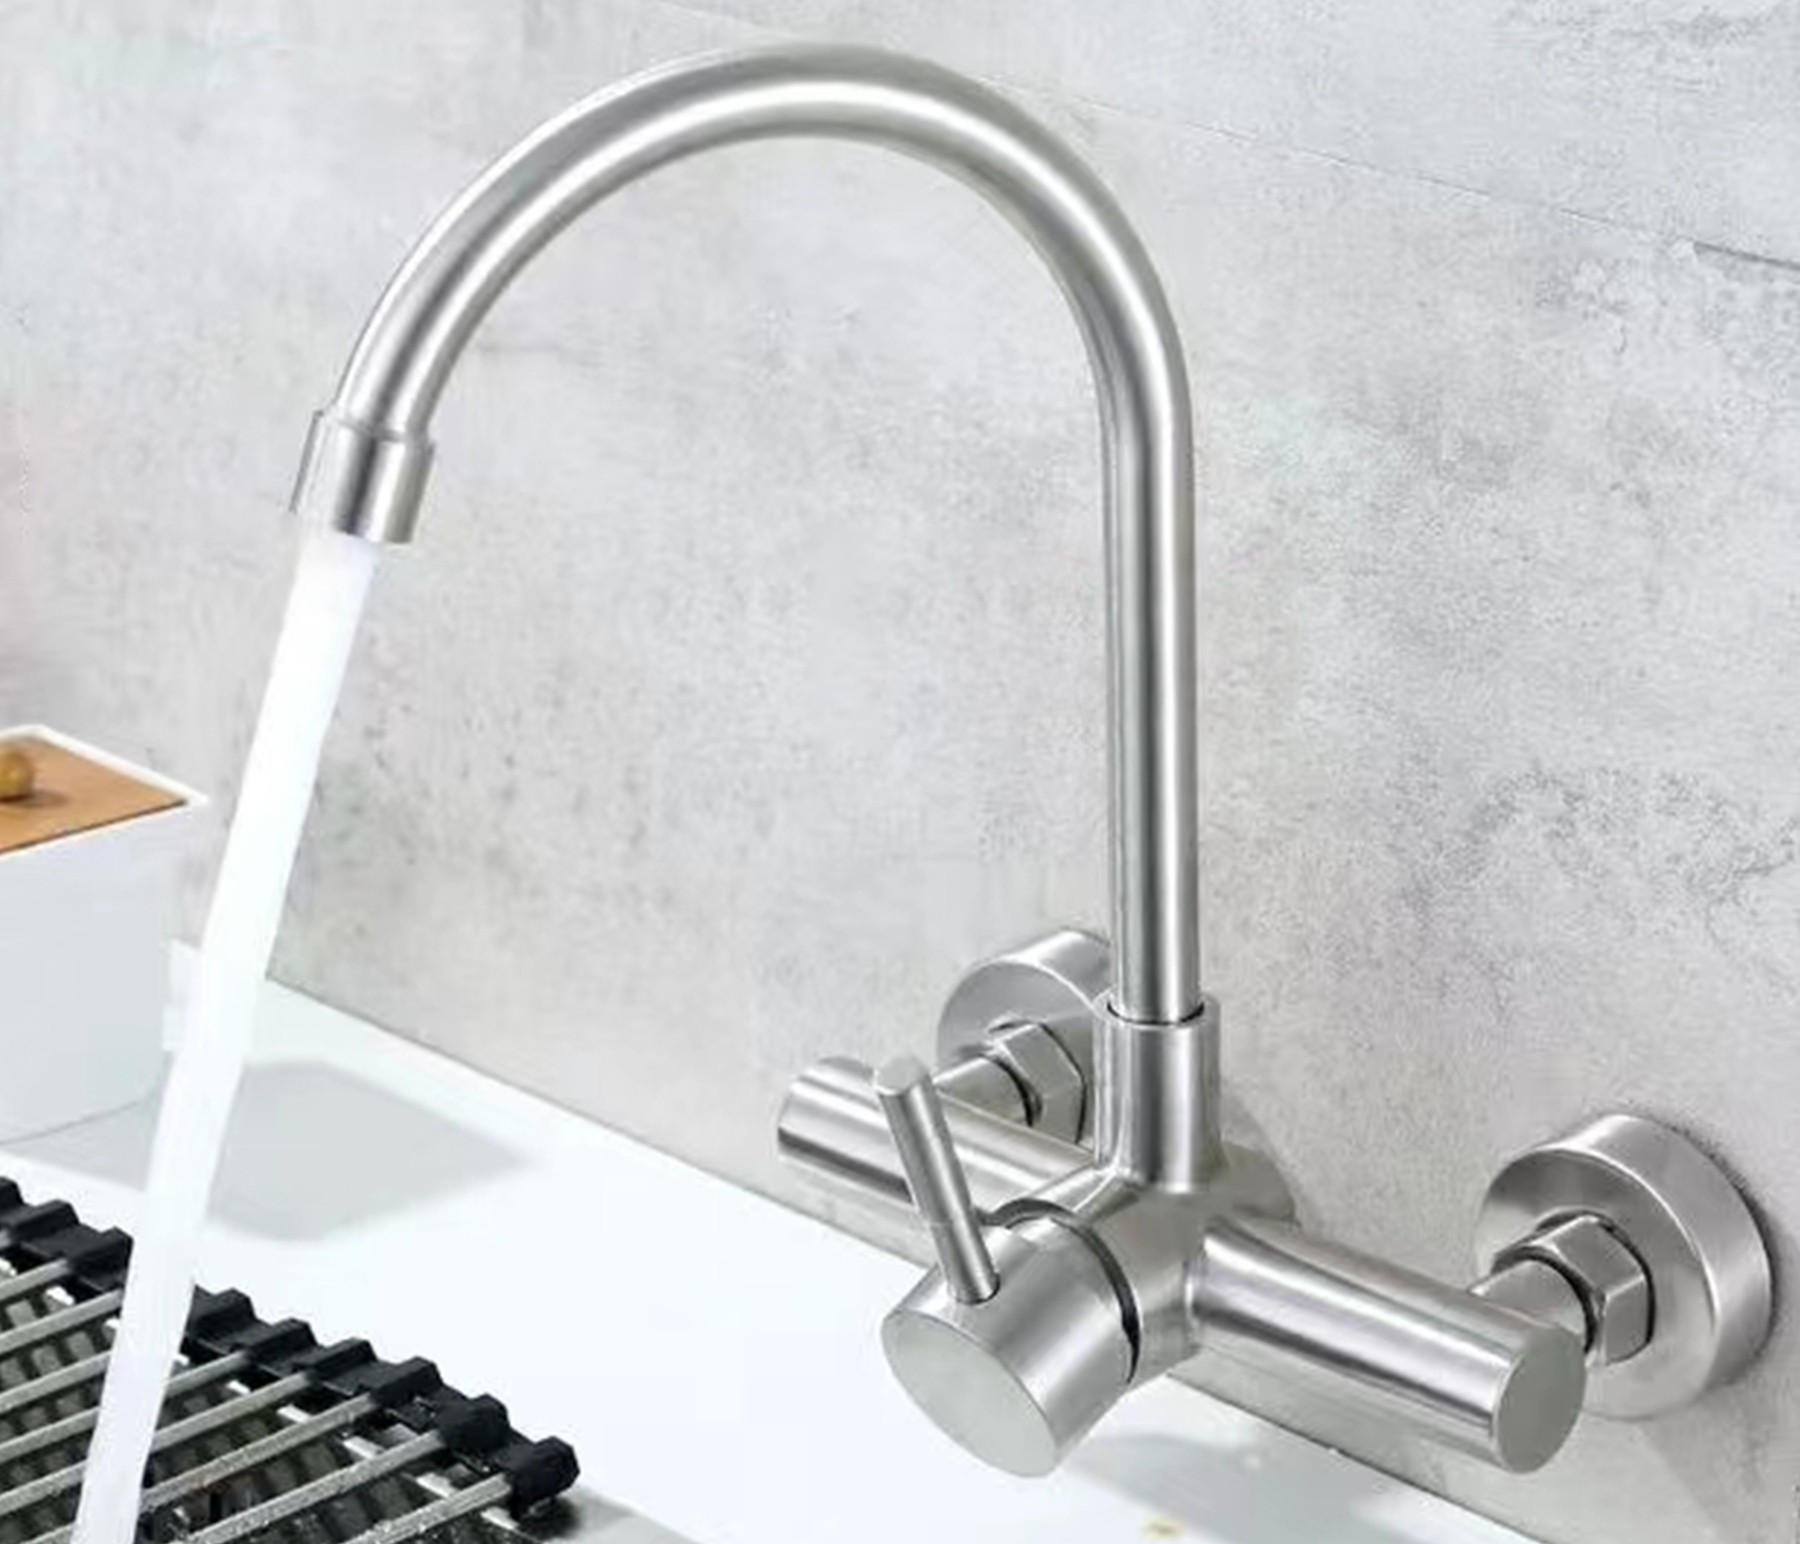 In-wall stainless steel hot and cold faucet